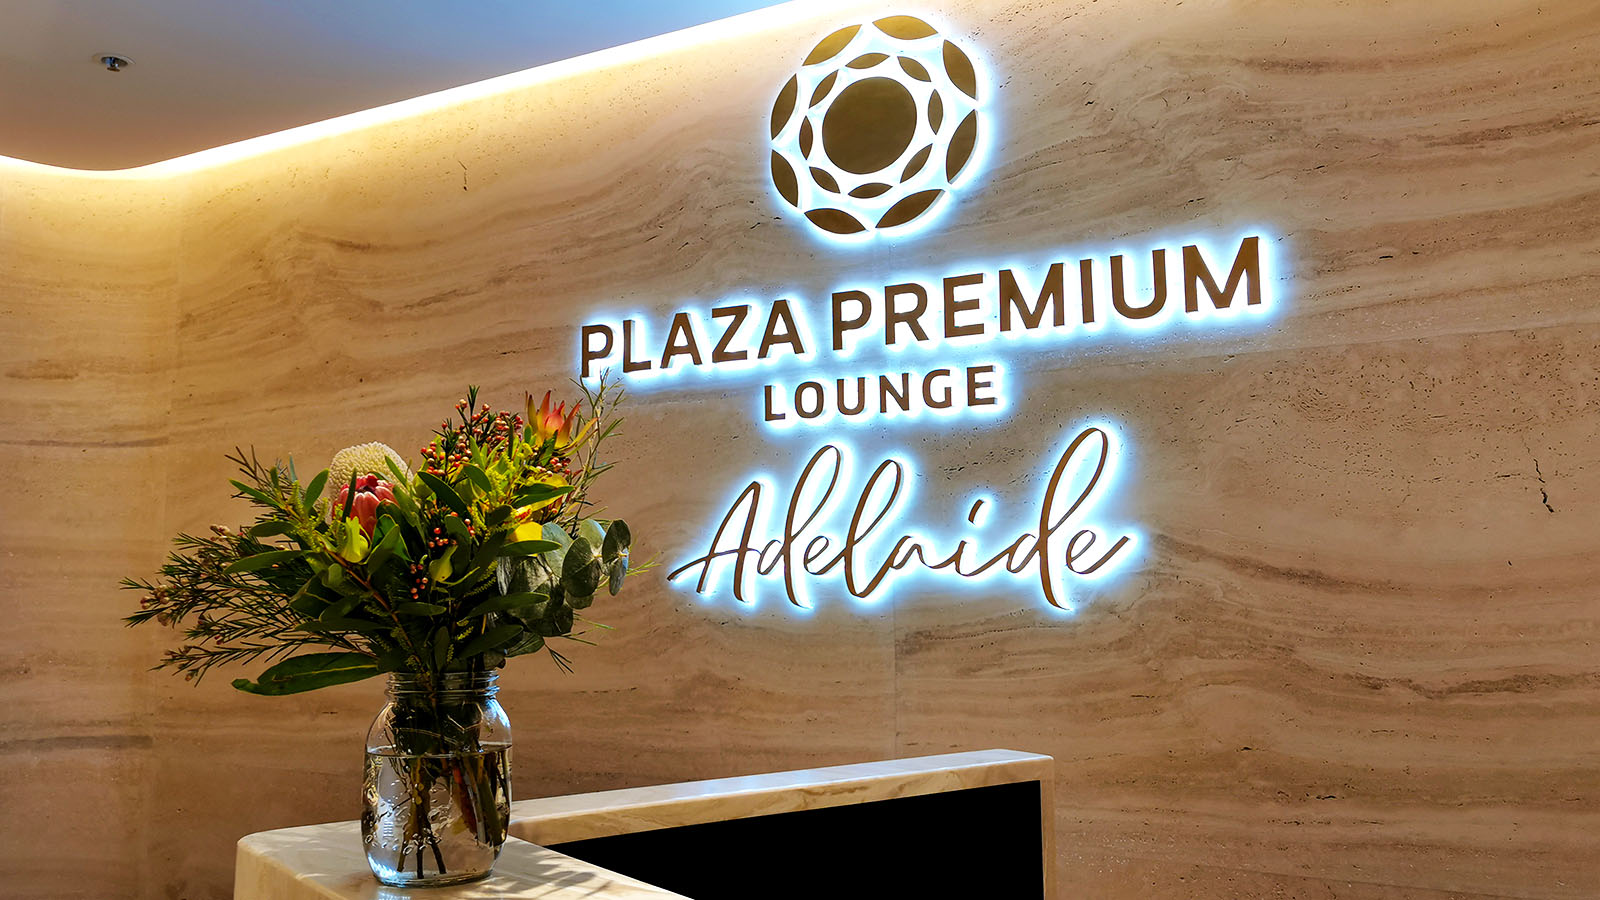 Front desk of the Plaza Premium Lounge, Adelaide